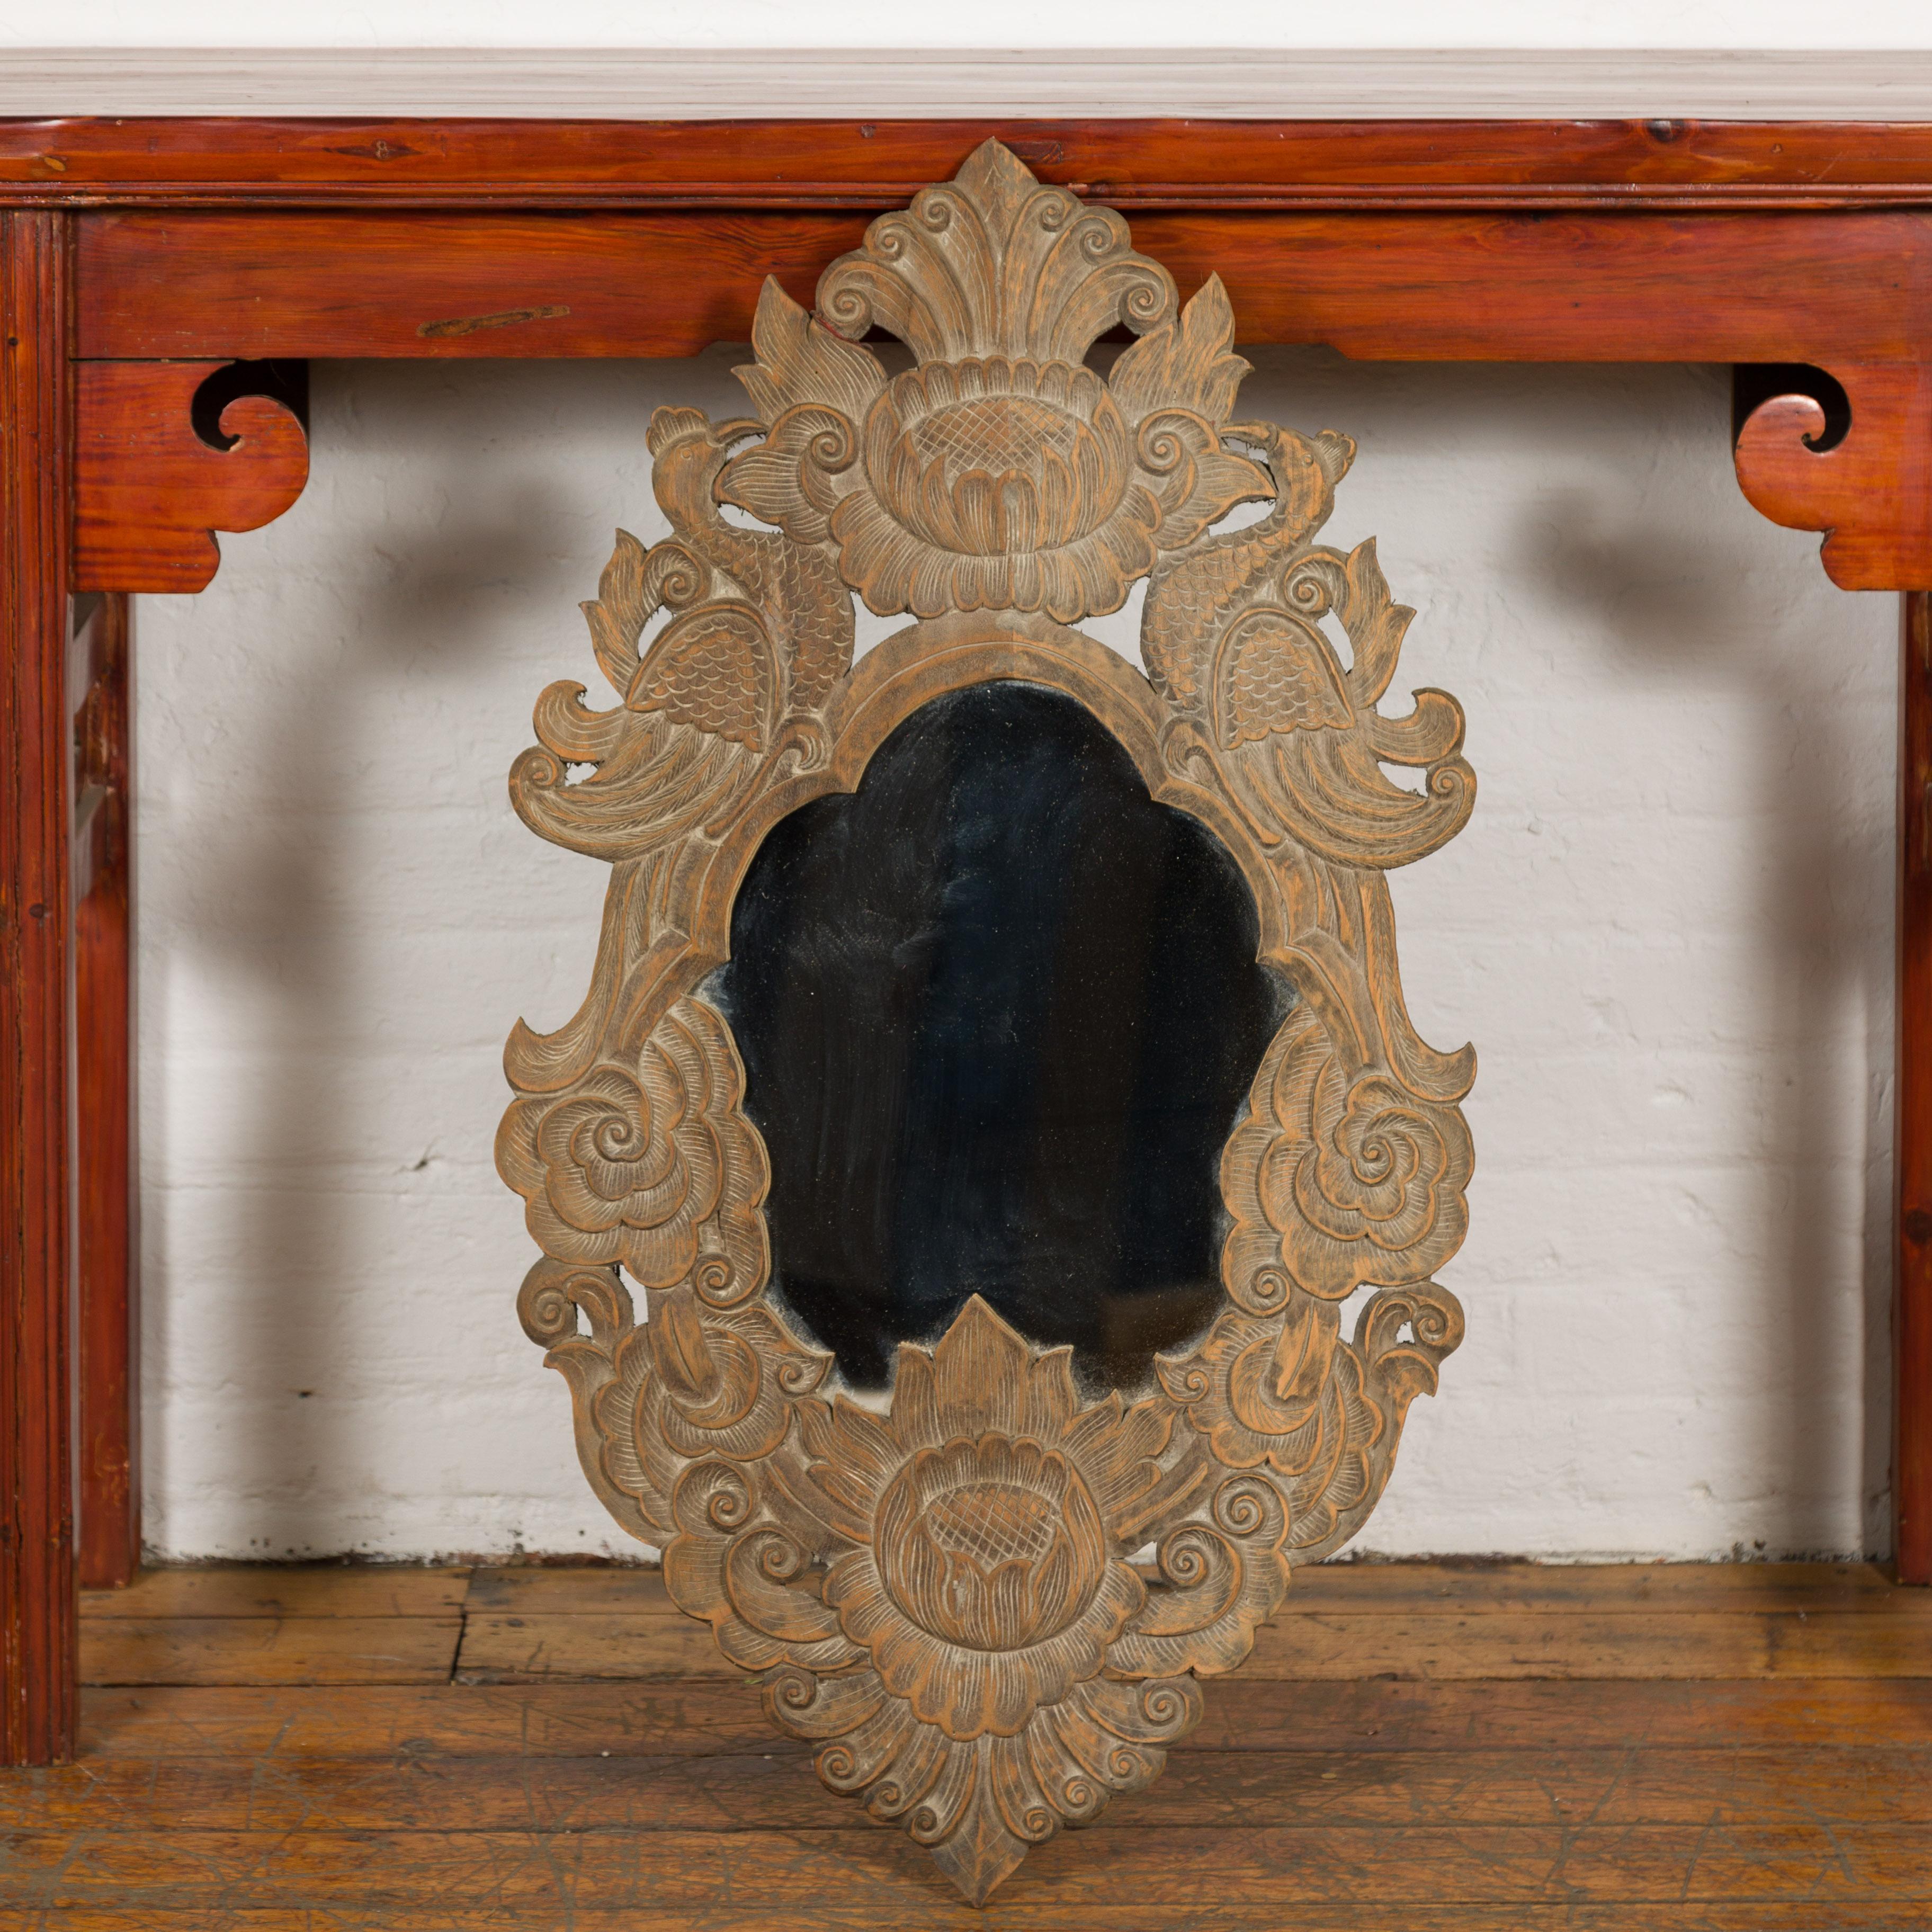 20th Century Vintage Thai Wooden Mirror with Carved Bird, Foliage and Flower Motifs For Sale